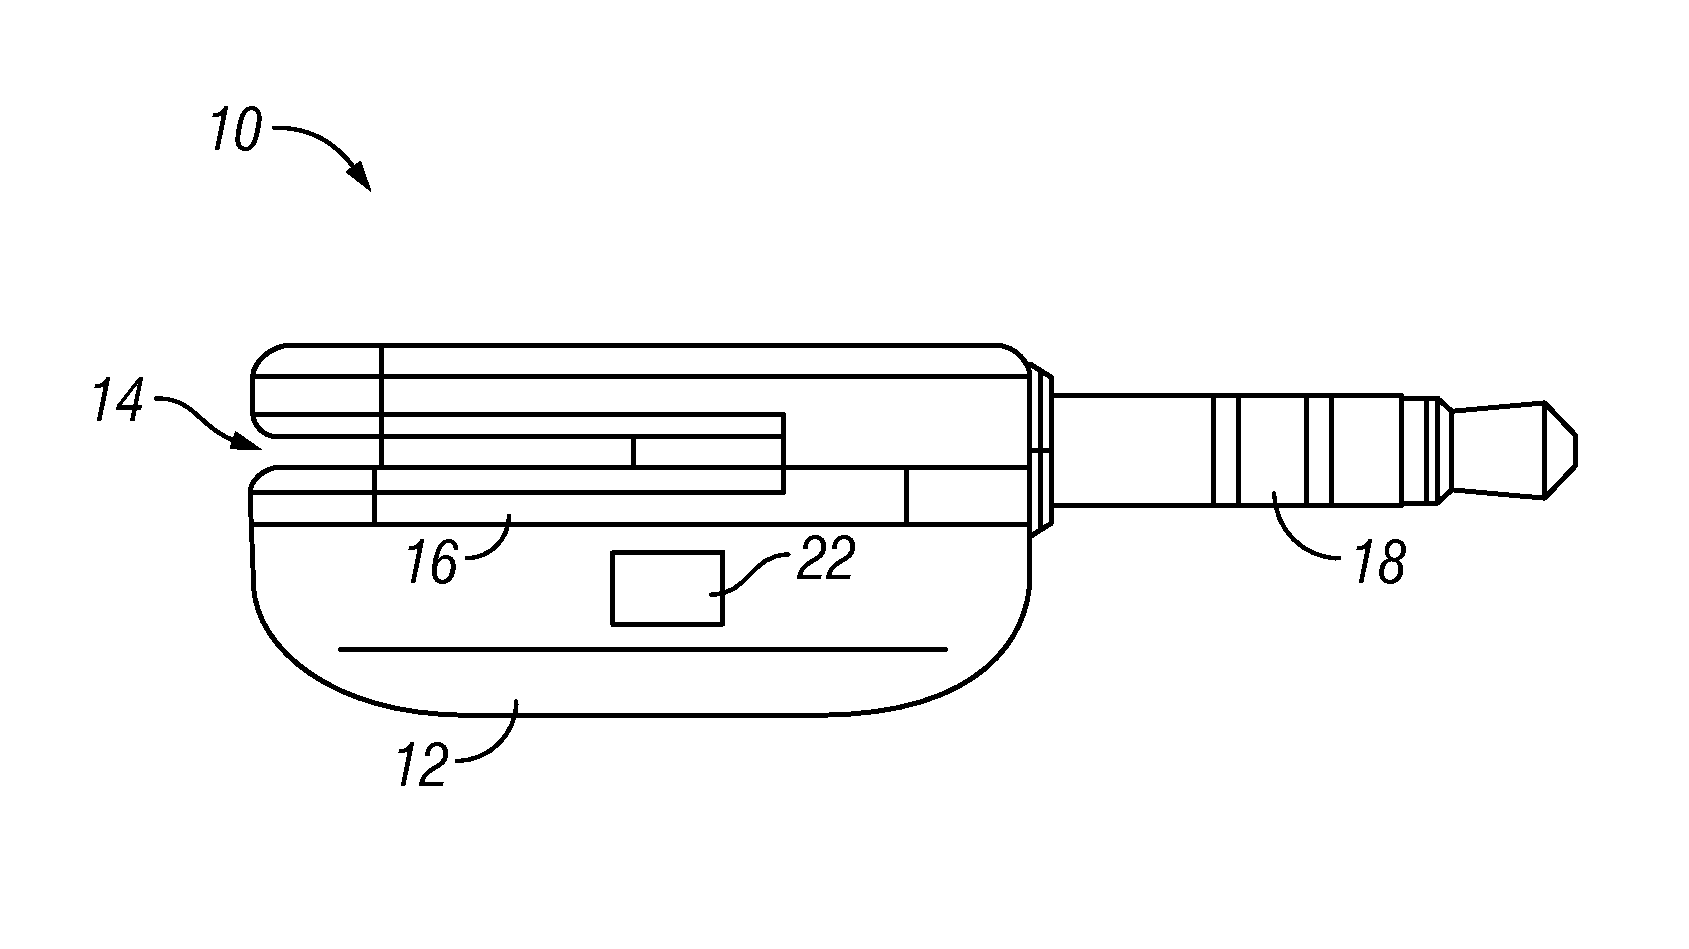 Method of transmitting information from efficient communication protocol card readers to mobile devices